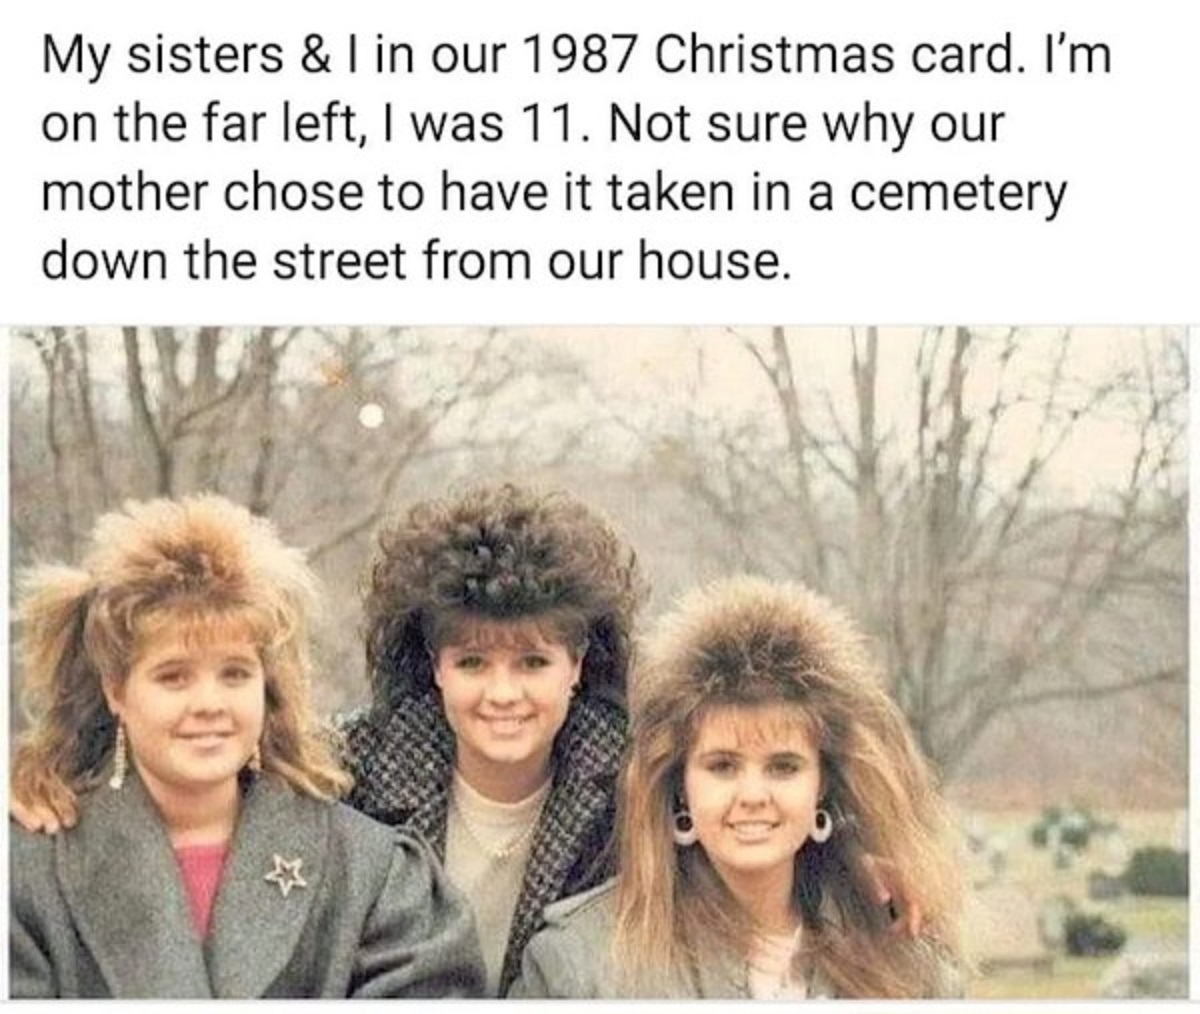 album cover - My sisters & I in our 1987 Christmas card. I'm on the far left, I was 11. Not sure why our mother chose to have it taken in a cemetery down the street from our house.